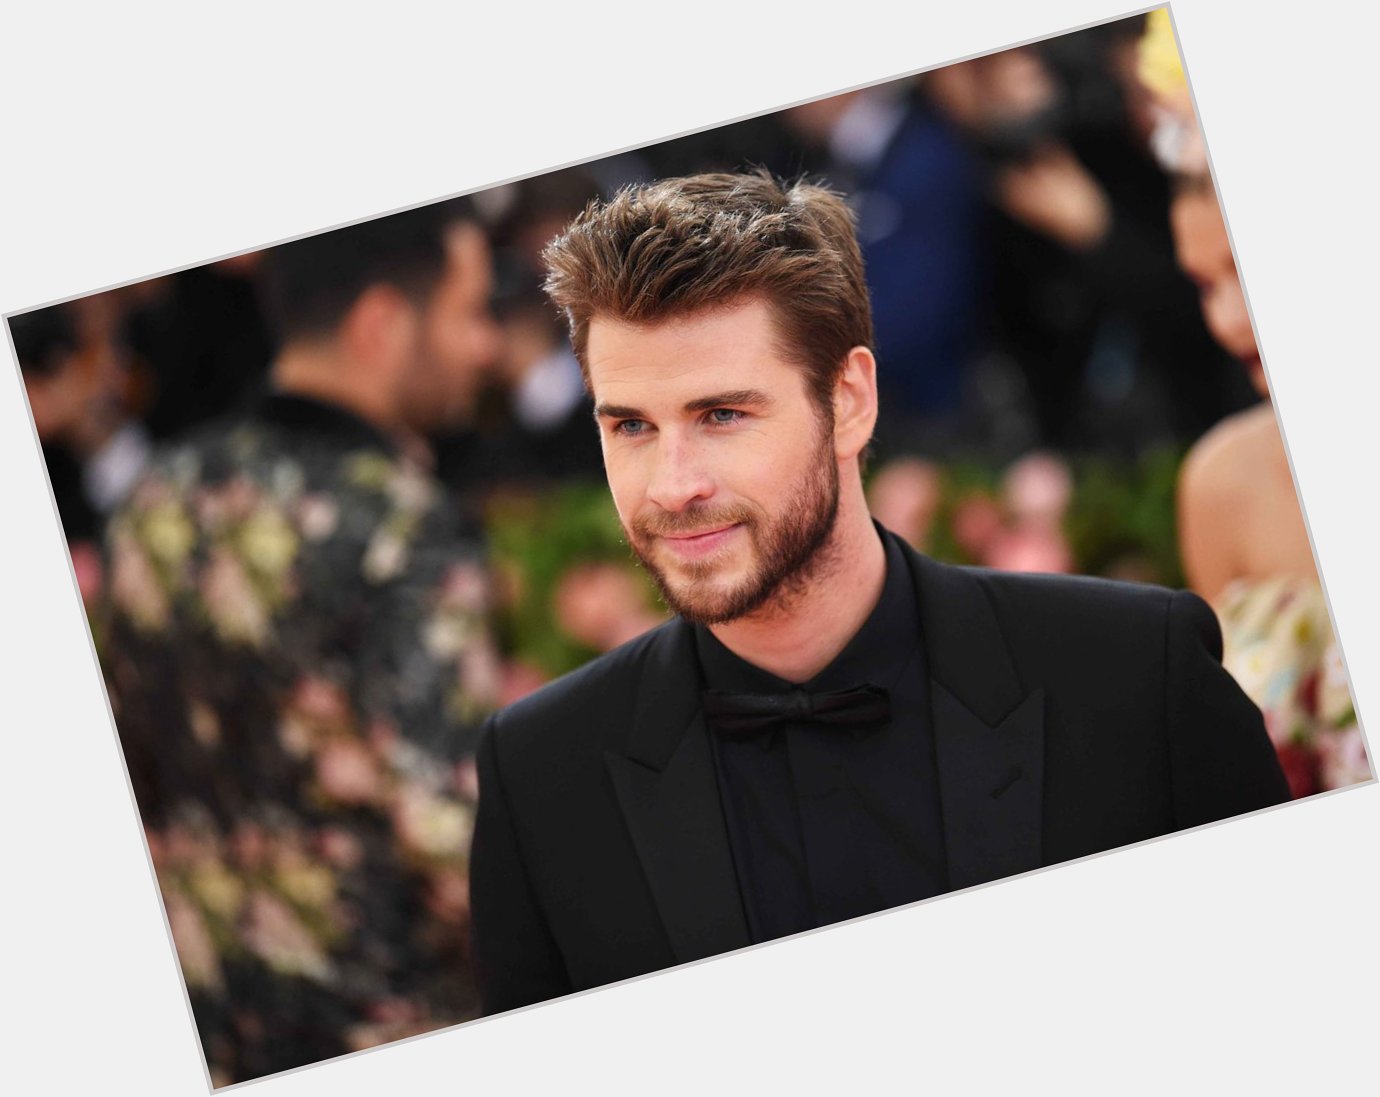 Liam Hemsworth turns 31 today, happy birthday!!

Which is your favorite film he\s in? 